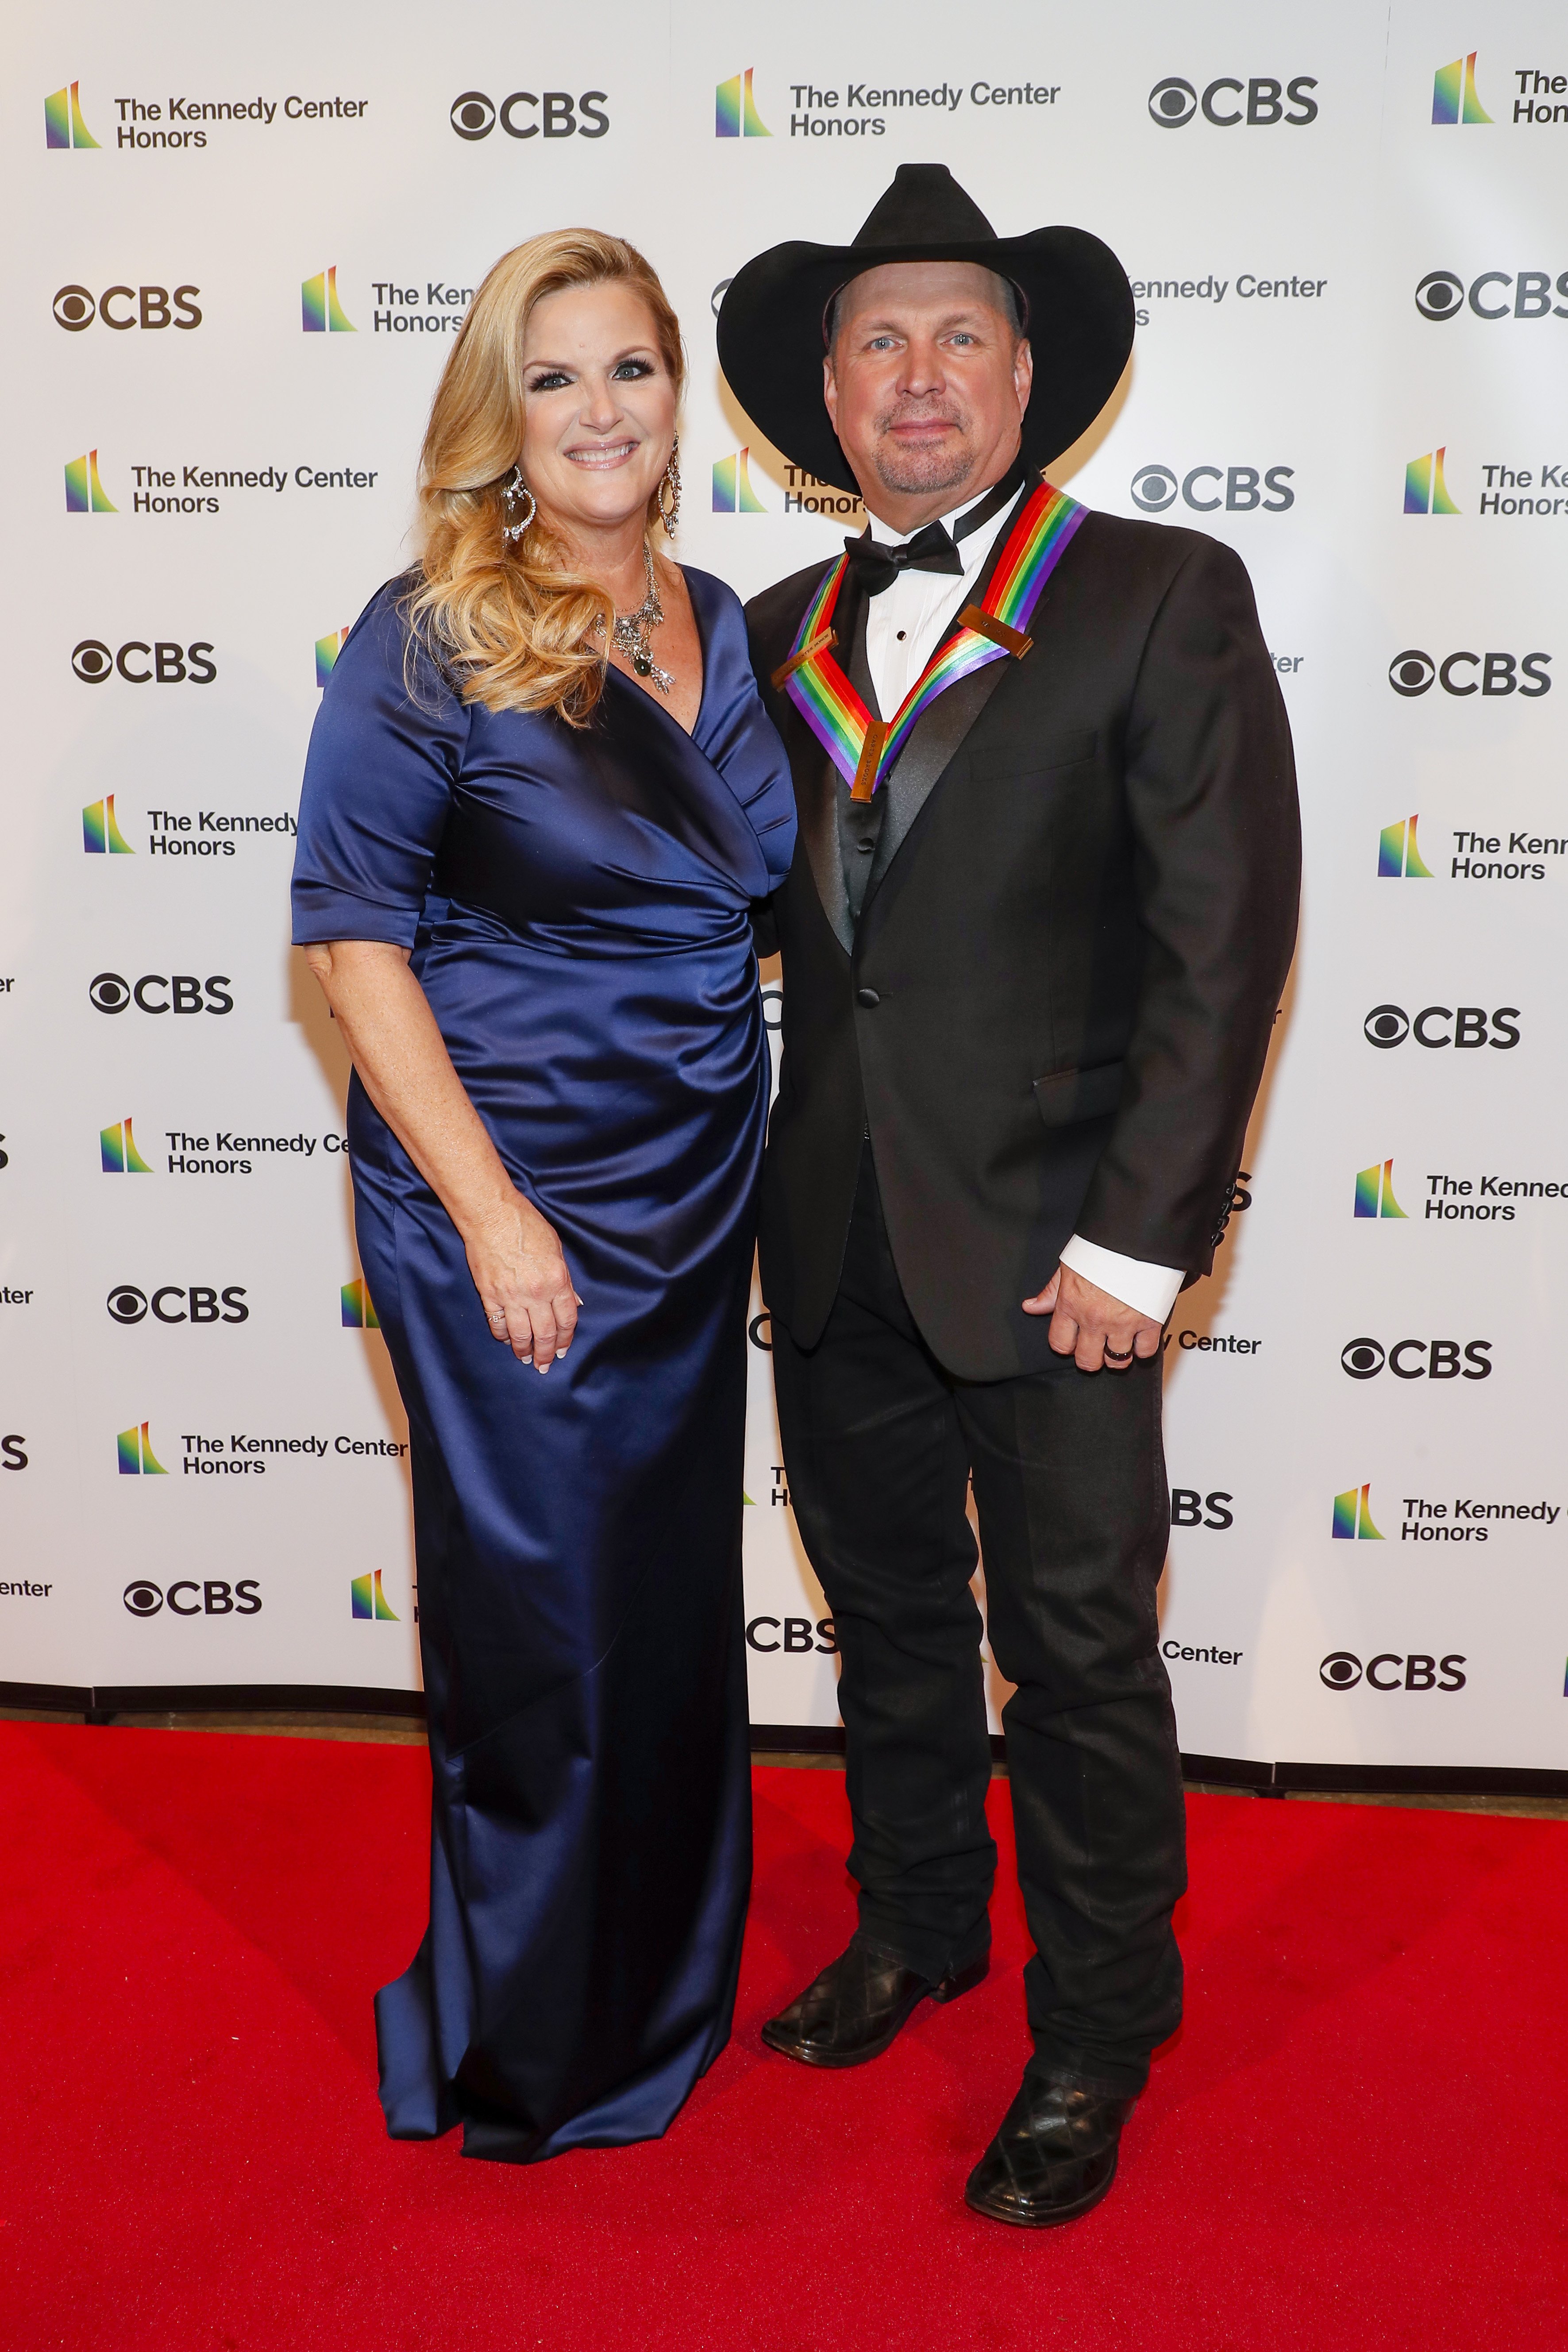 Trisha Yearwood and Garth Brooks attends the 43rd Annual Kennedy Center Honors at The Kennedy Center on May 21, 2021 in Washington, DC. | Source: Getty Images